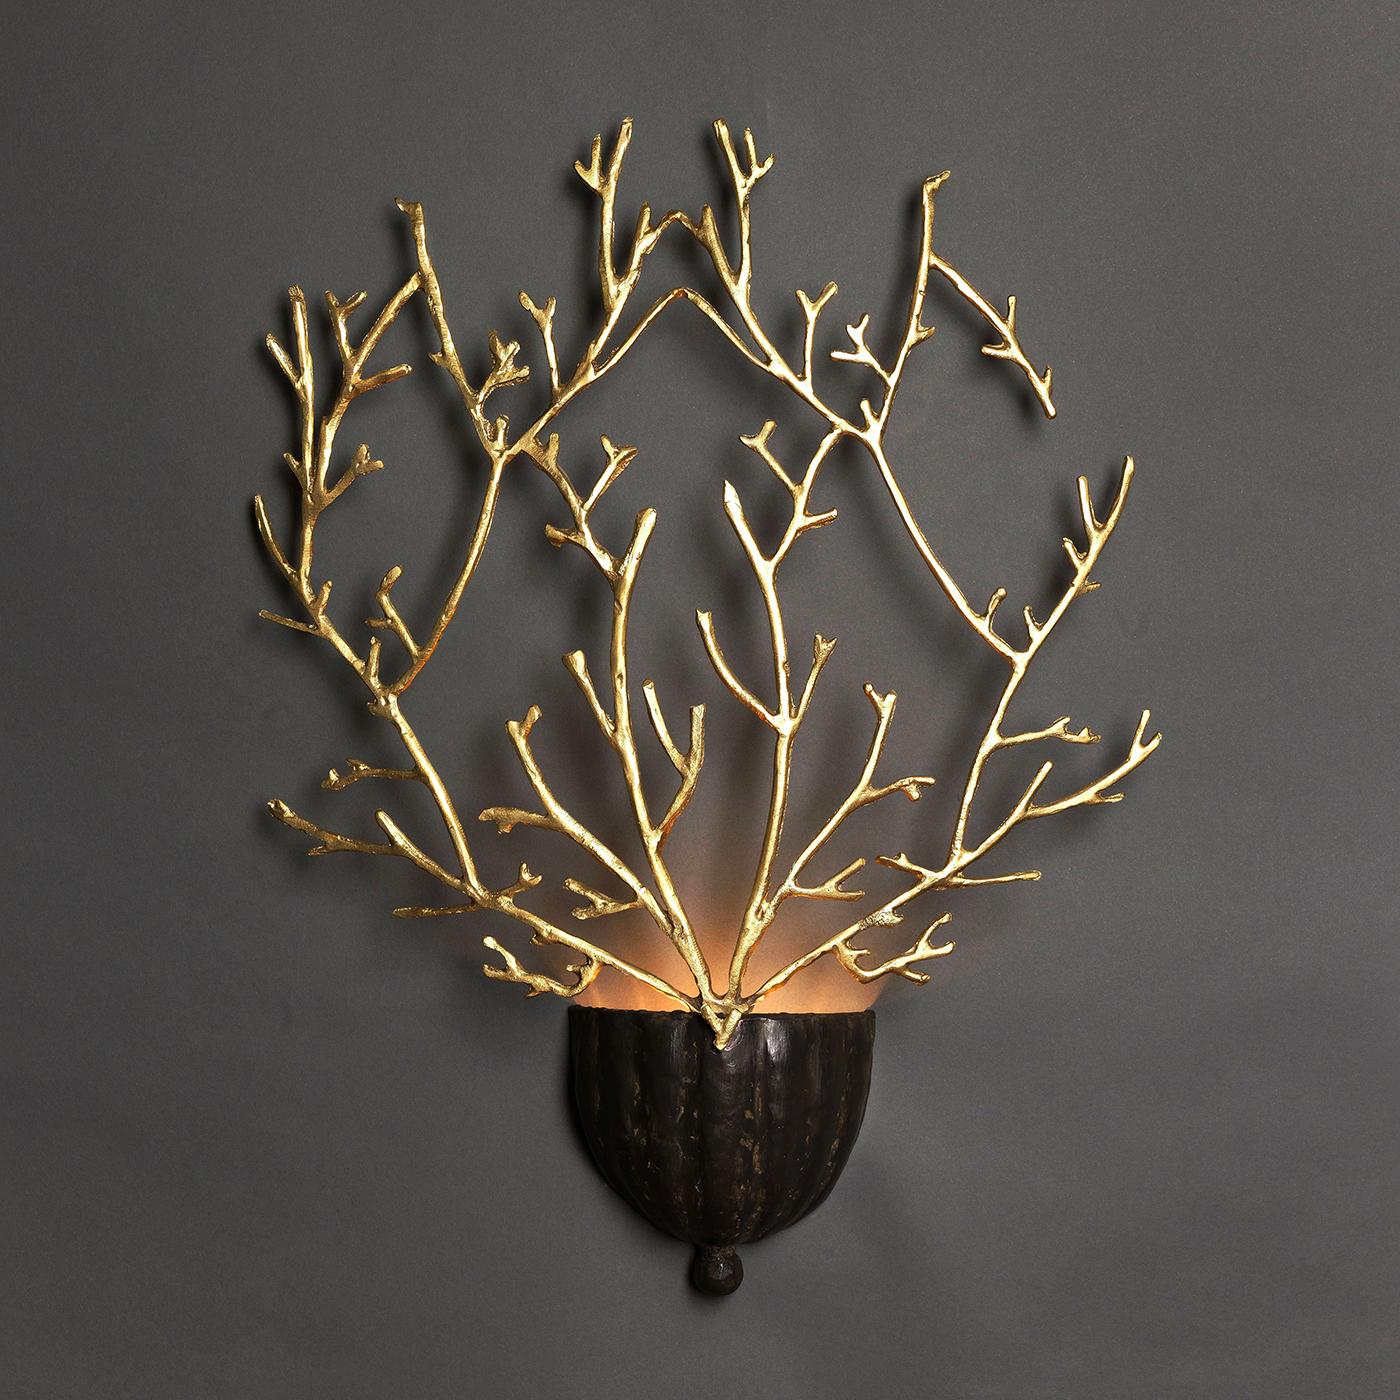 Named after the Italian word for corals, this stunning sconce evokes these marine creatures in the organic texture in the striking branches that form its silhouette. The lightweight body is crafted of brass, reflecting the light coming from the two